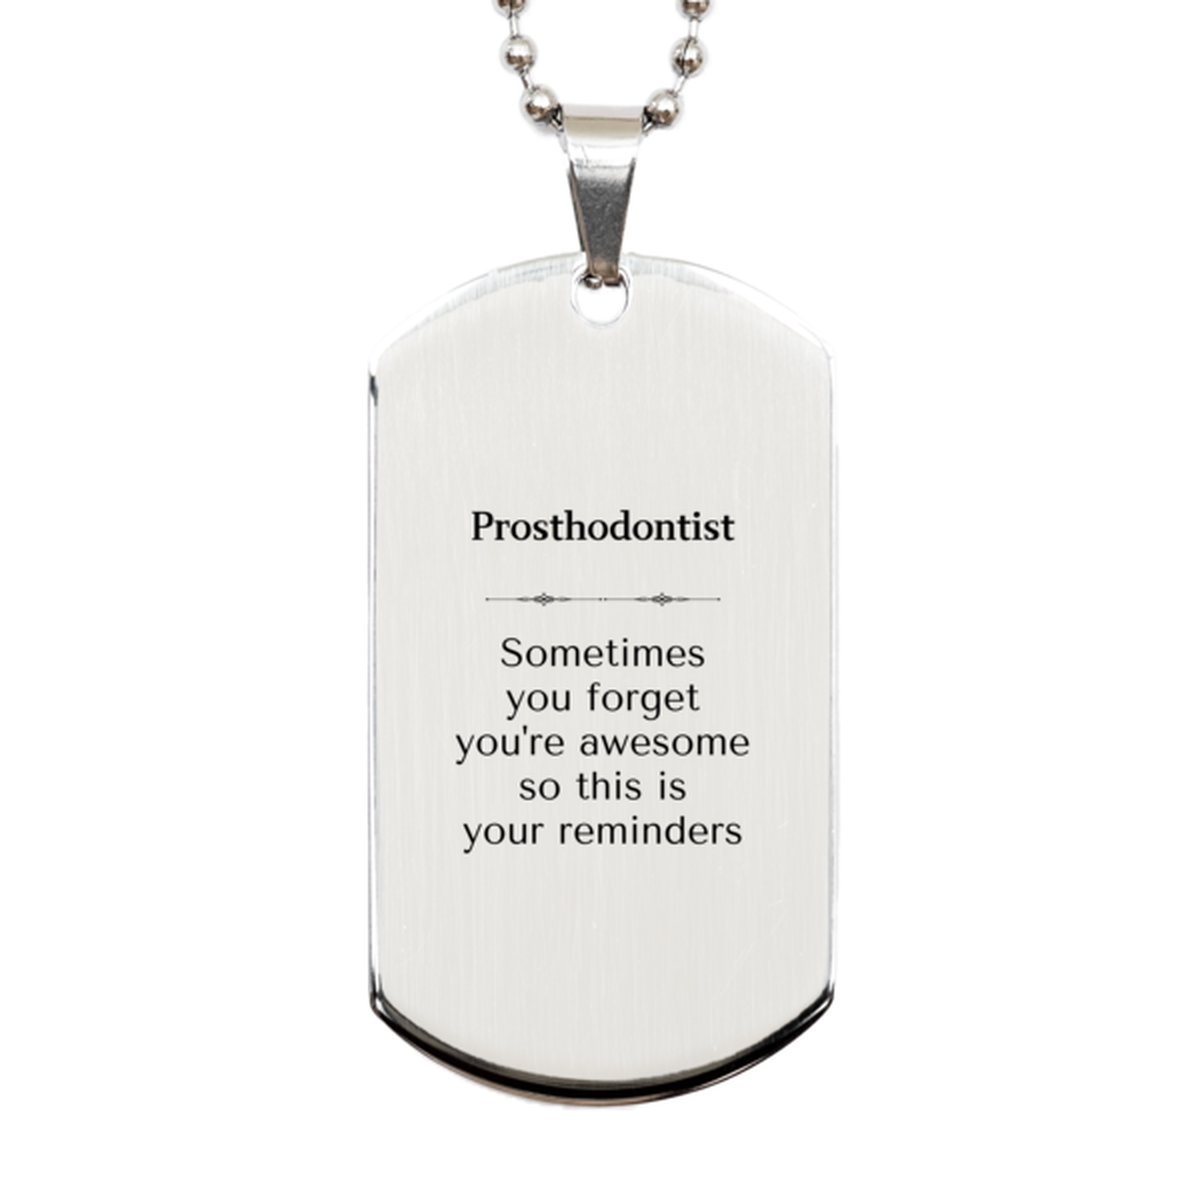 Sentimental Prosthodontist Silver Dog Tag, Prosthodontist Sometimes you forget you're awesome so this is your reminders, Graduation Christmas Birthday Gifts for Prosthodontist, Men, Women, Coworkers